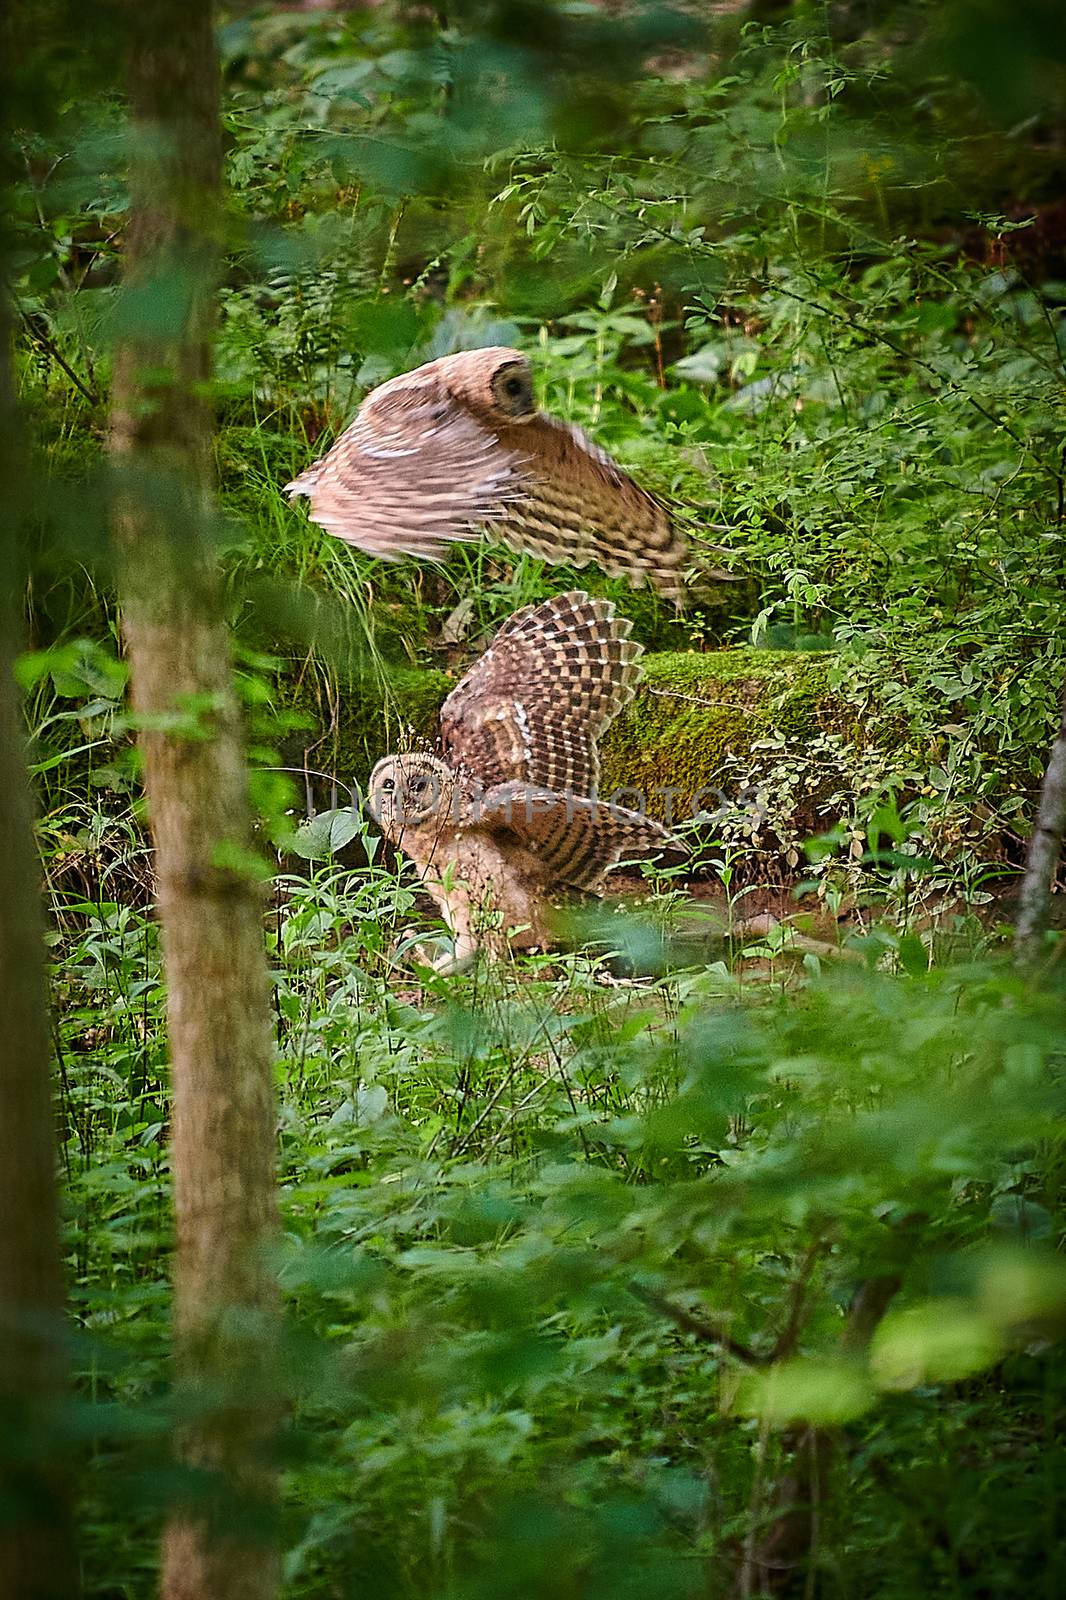 Young juvenile Barred Owls learning to hunt. by patrickstock